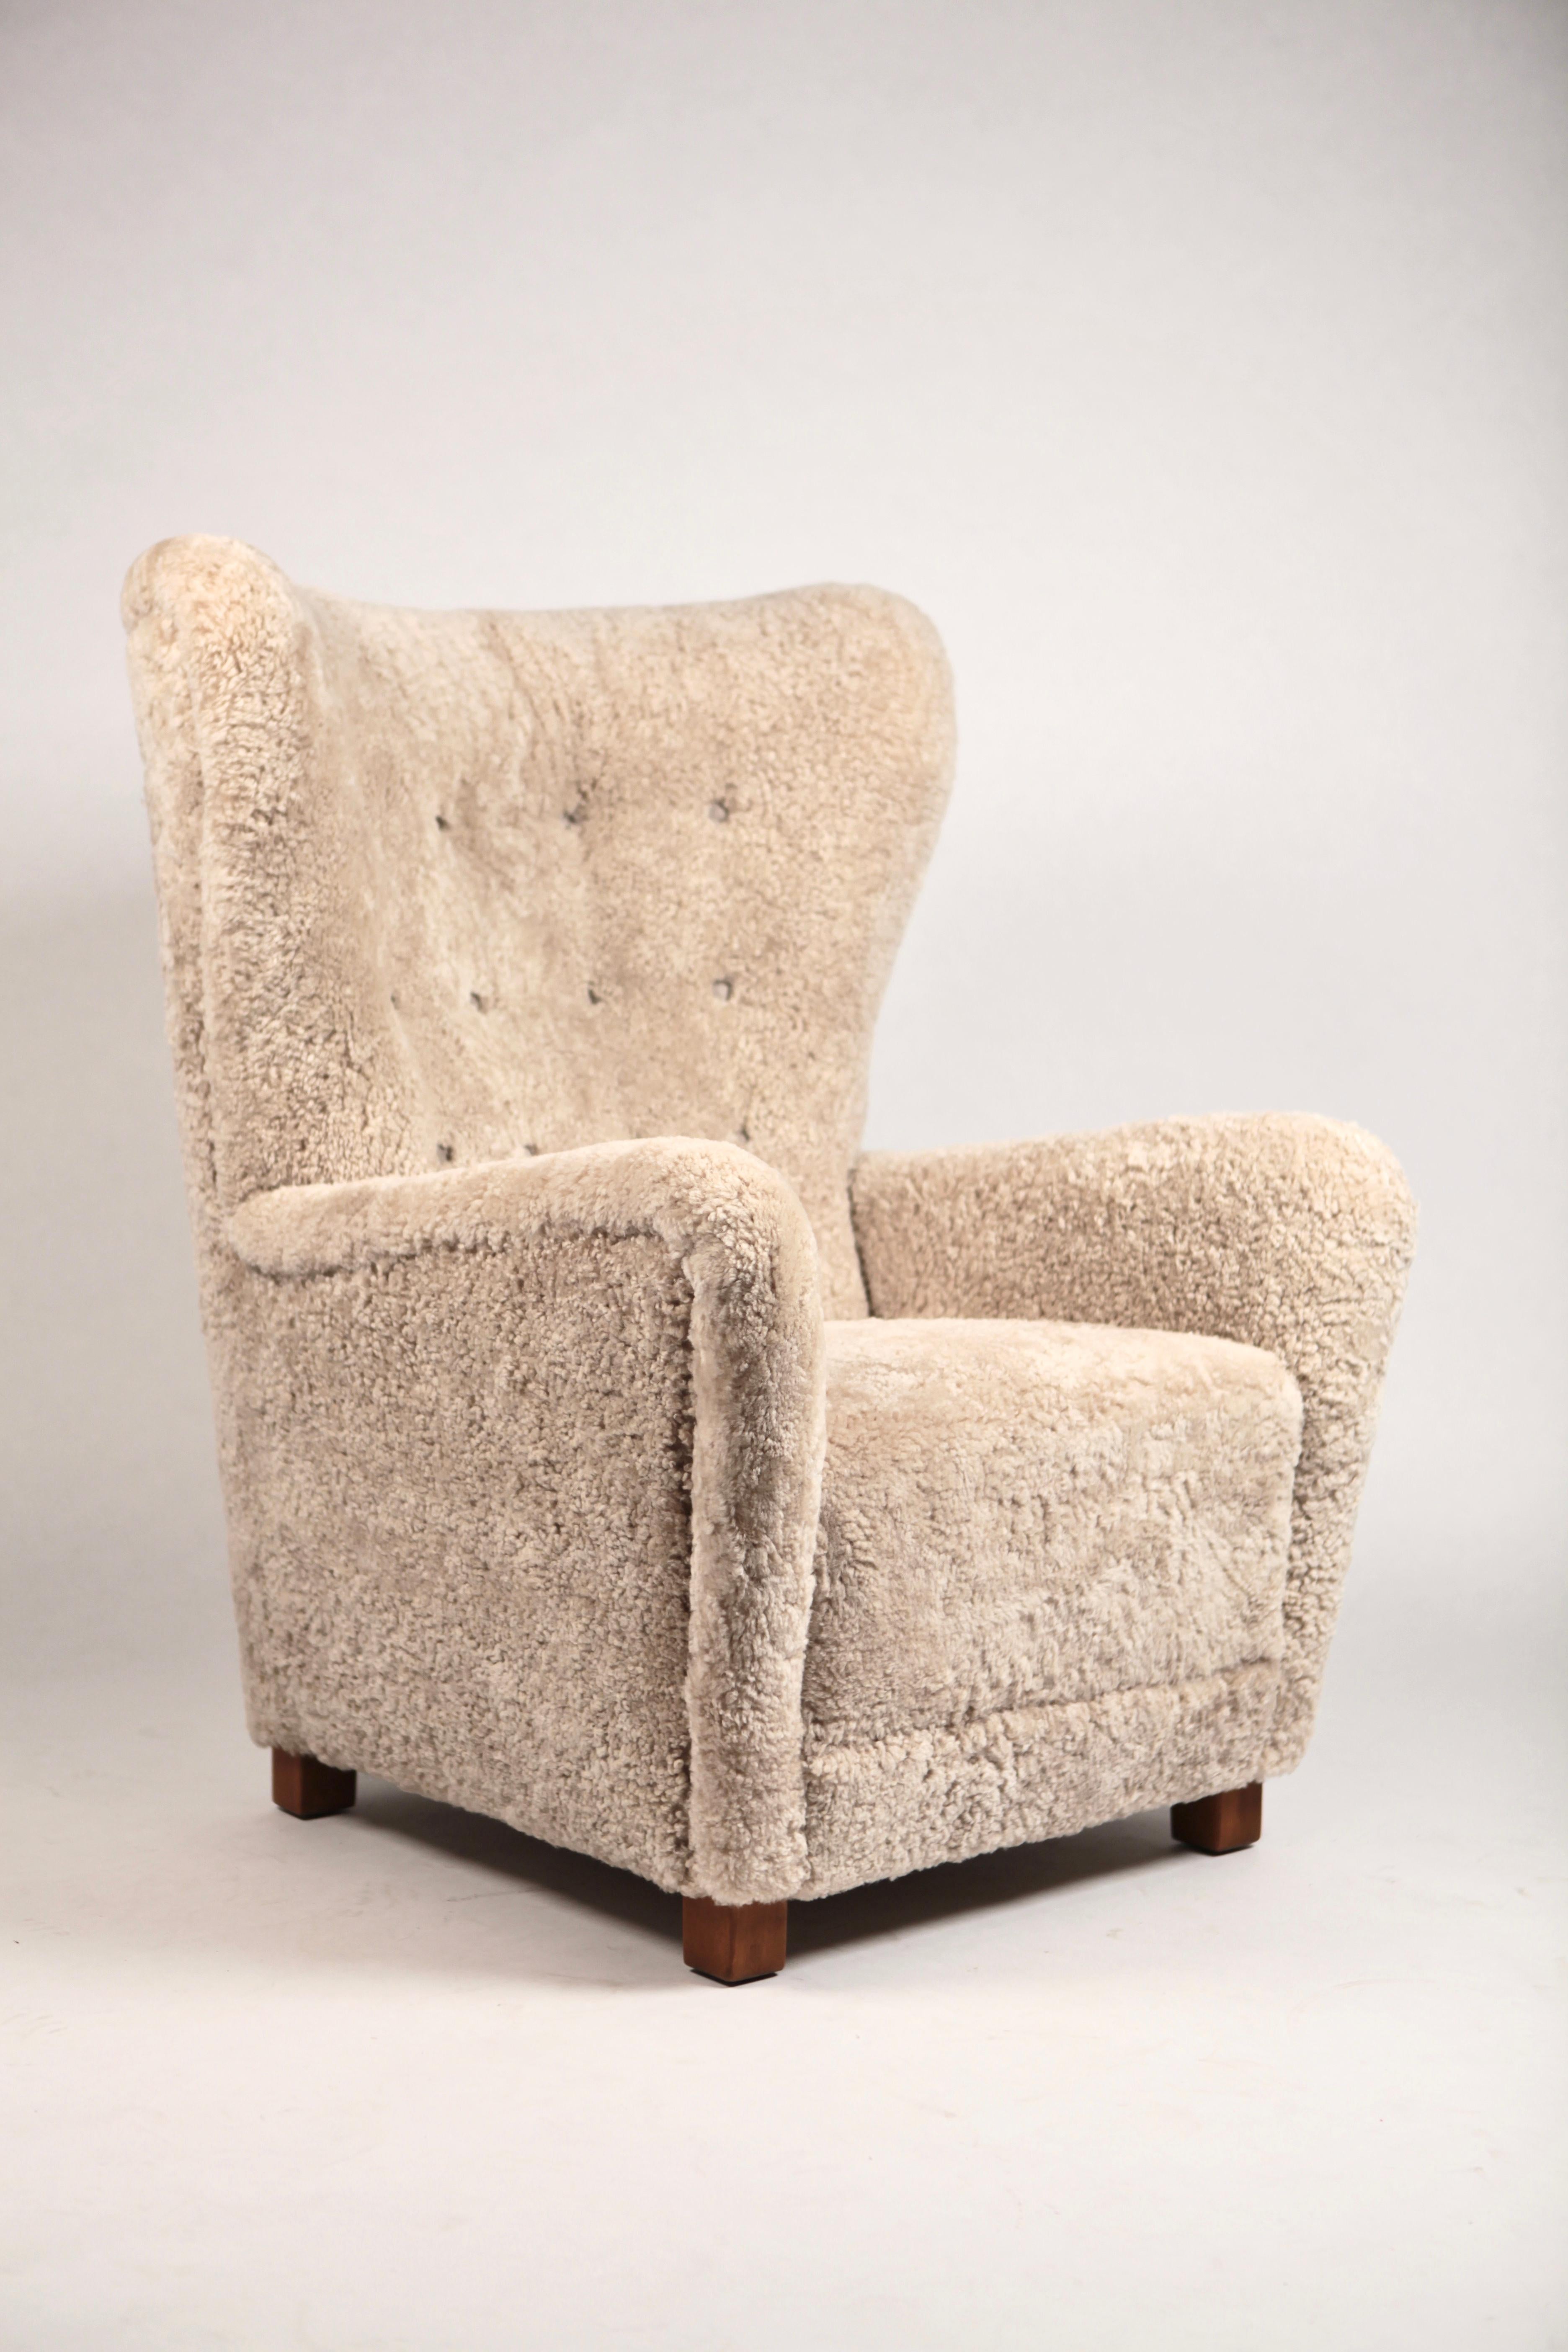 Large high wing back easy chair by Fritz Hansen, model 1672, executed in Denmark, 1940s.
New reupholstered in New Zealand shearling, deep fitted leather buttons, stained oak legs.
Excellent condition.